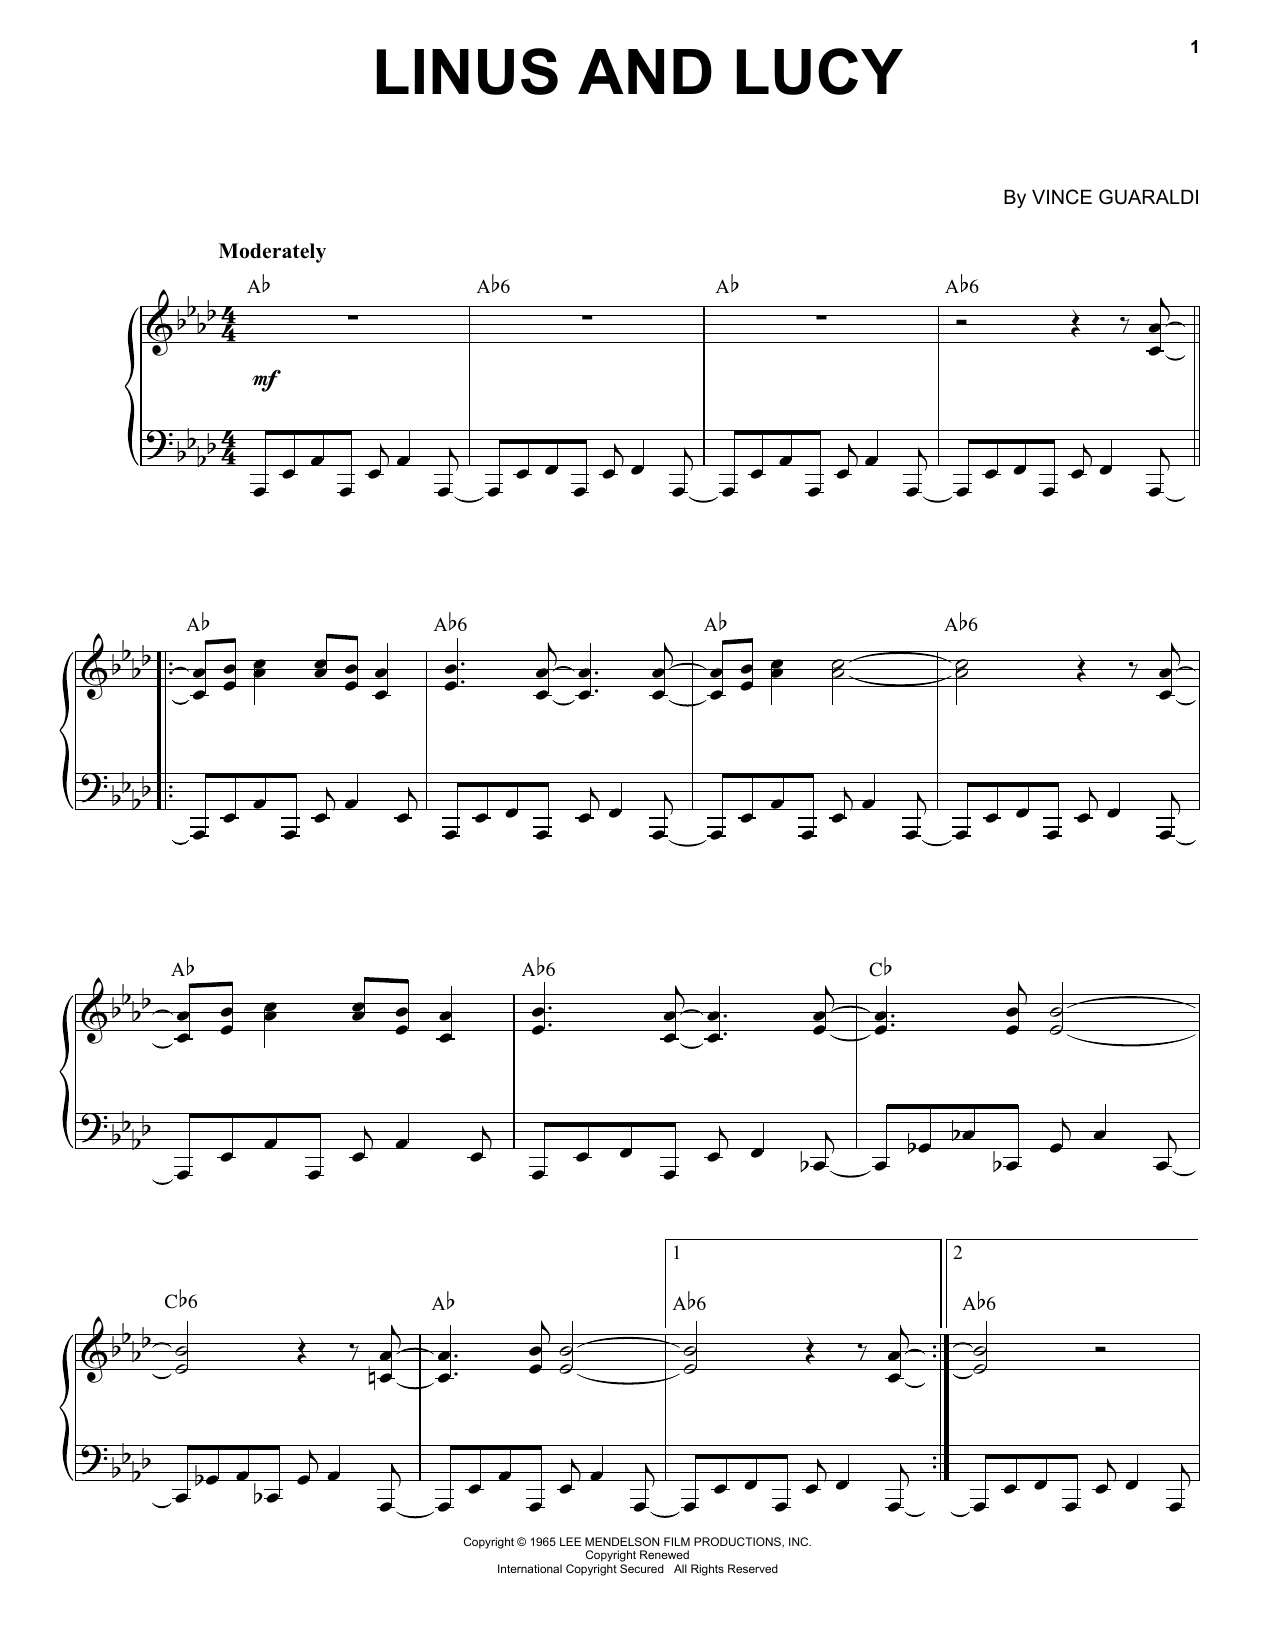 Download Vince Guaraldi Linus And Lucy Sheet Music